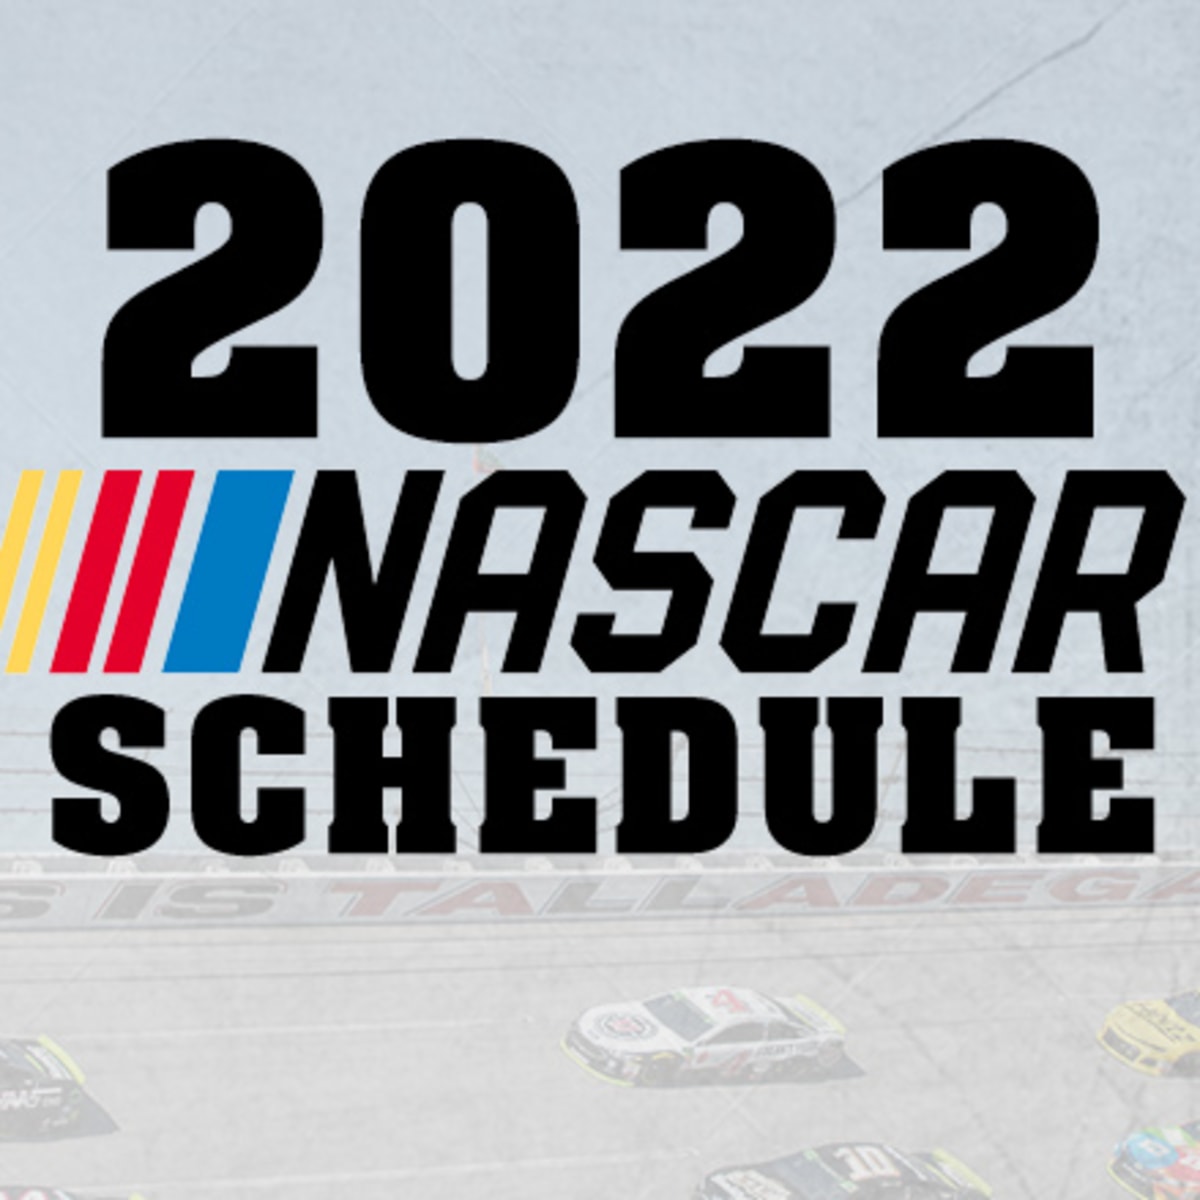 Nascar Monster Schedule 2022 2022 Nascar Schedule: Nascar Cup Series - Athlonsports.com | Expert  Predictions, Picks, And Previews